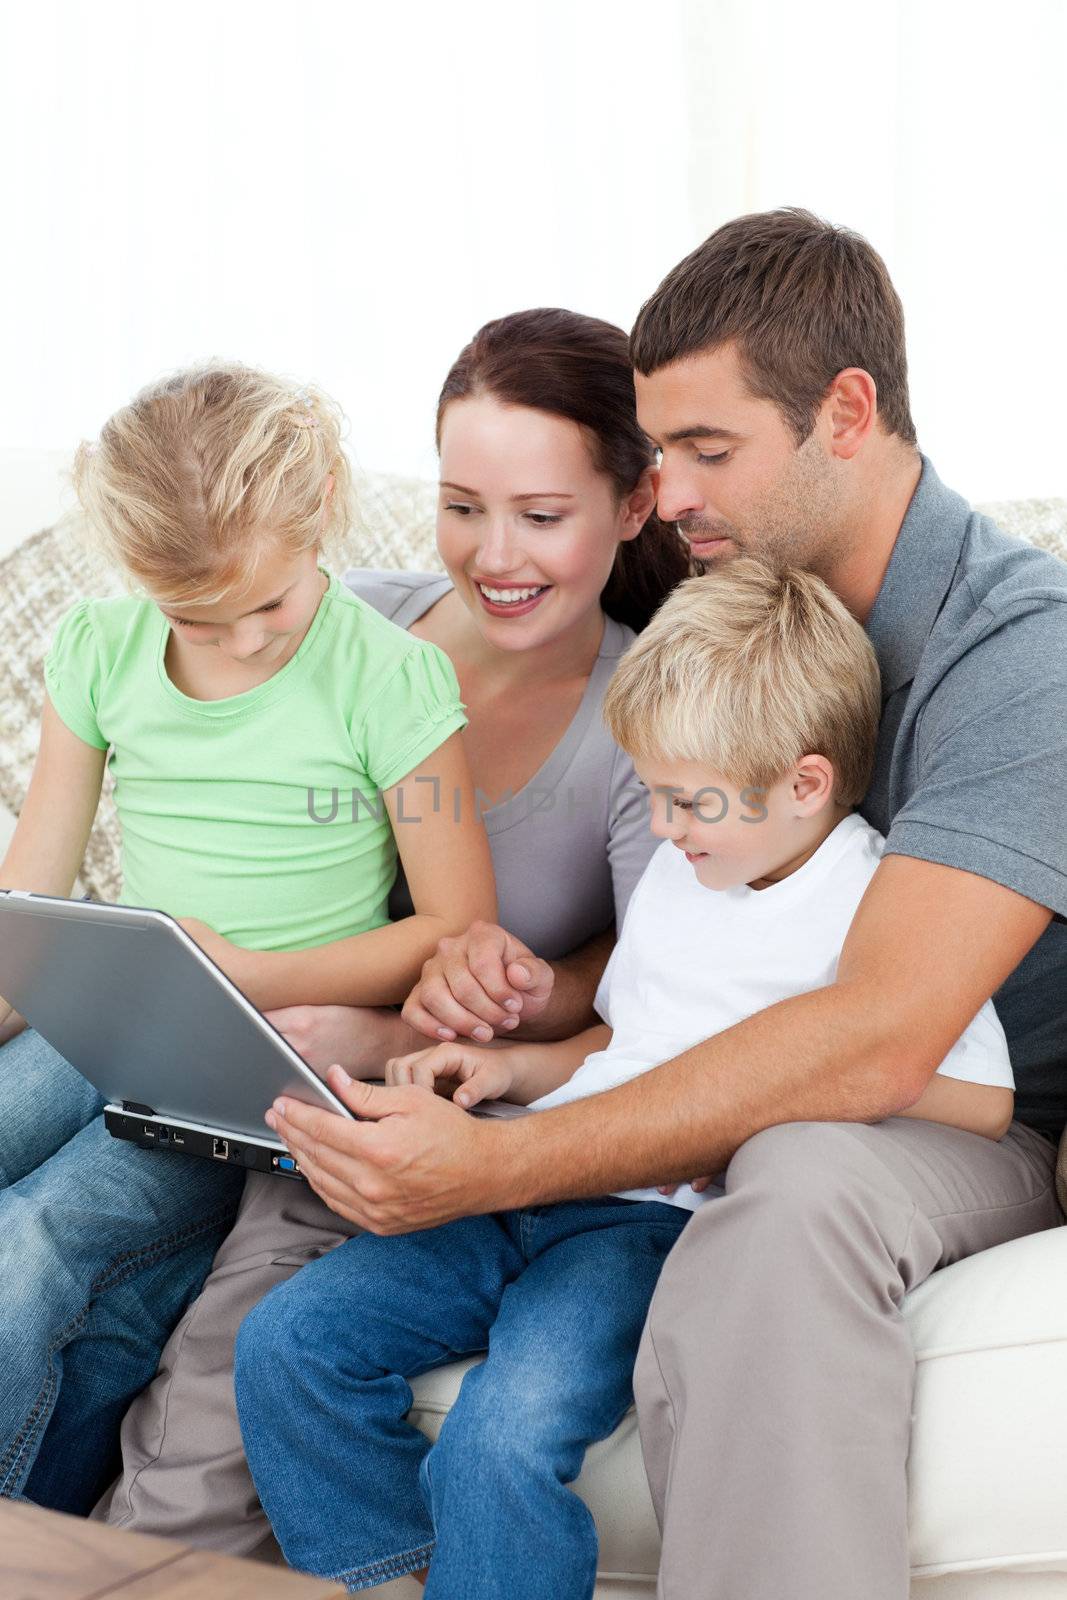 Parents and children using their laptop together sitting on the sofa at home